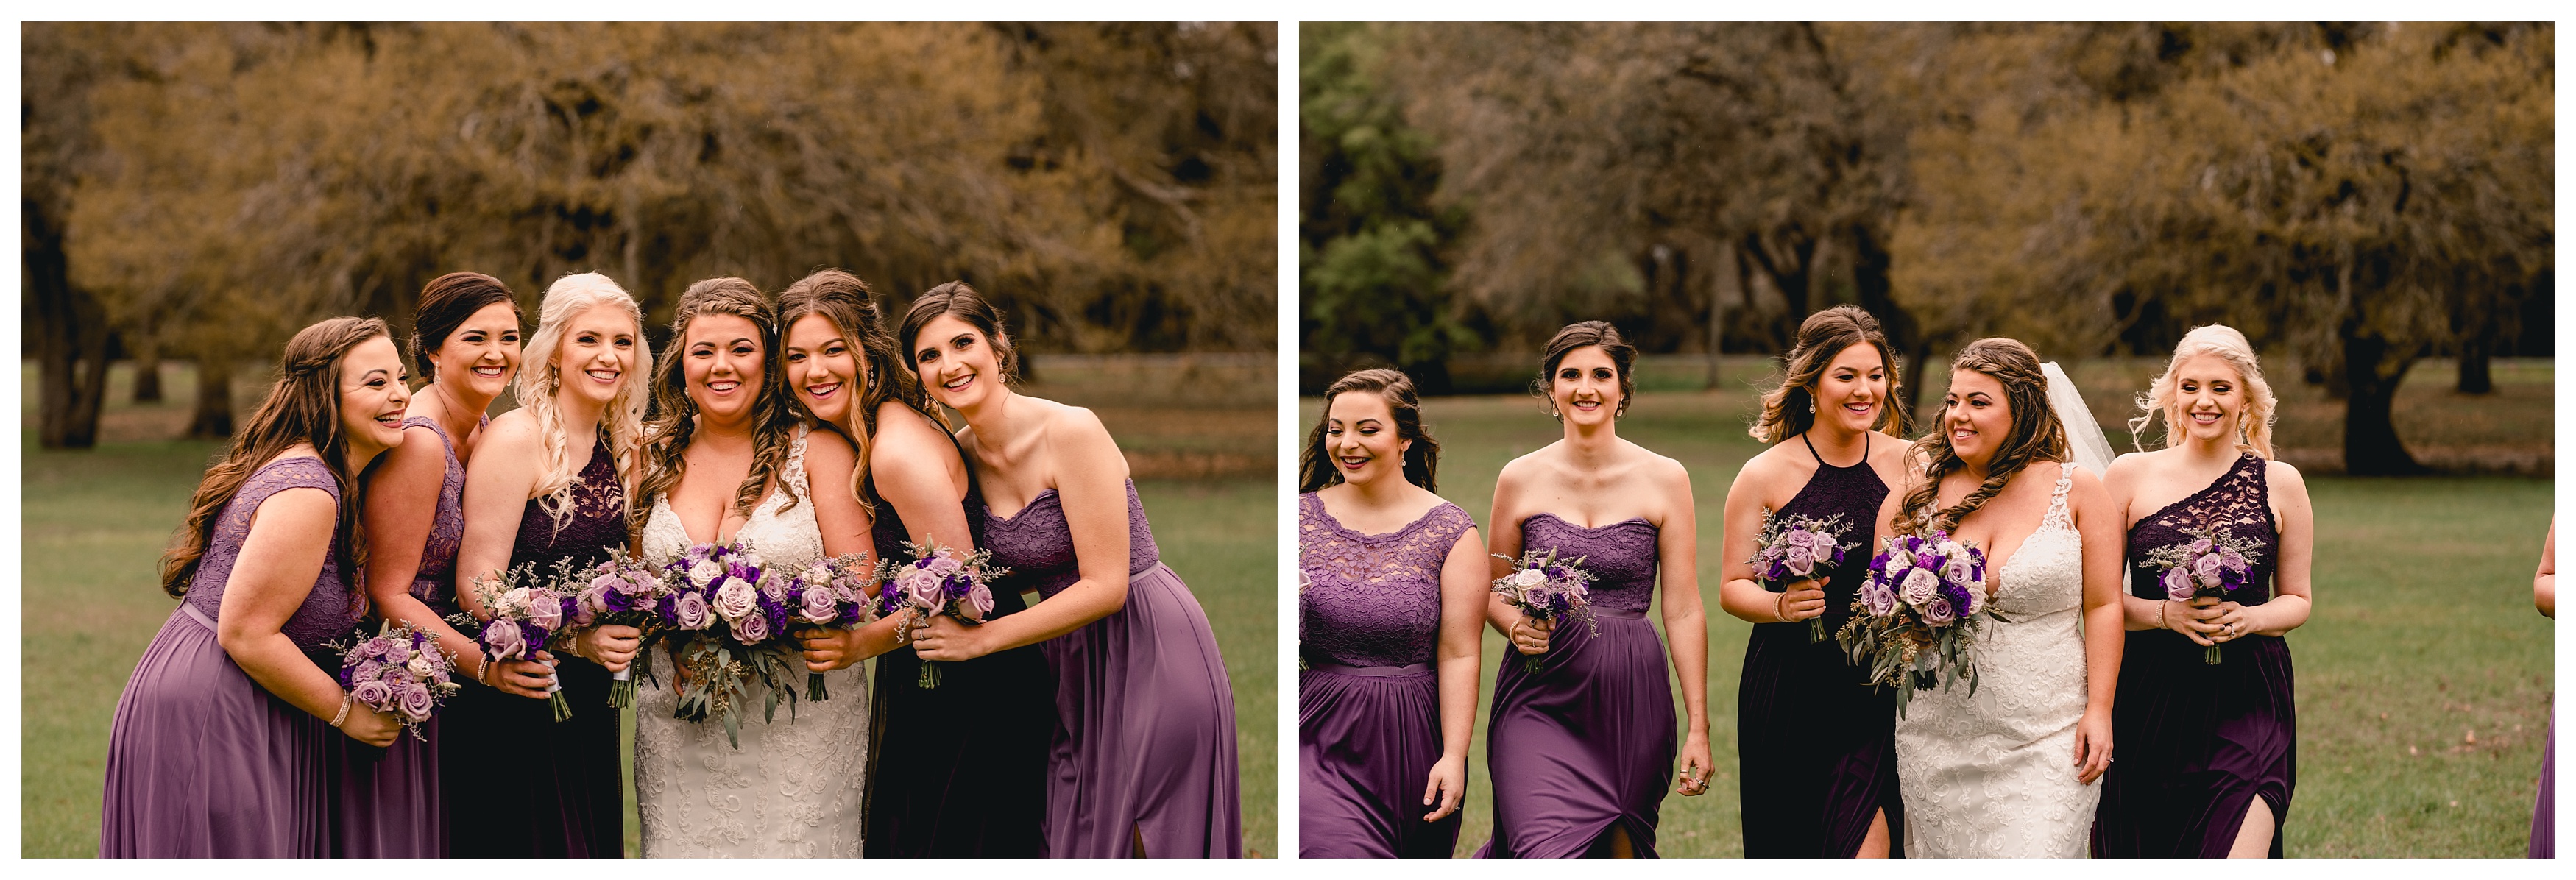 Bride with her bridesmaids having a good time on wedding day. Tallahassee wedding photographer, Shelly Williams Photography